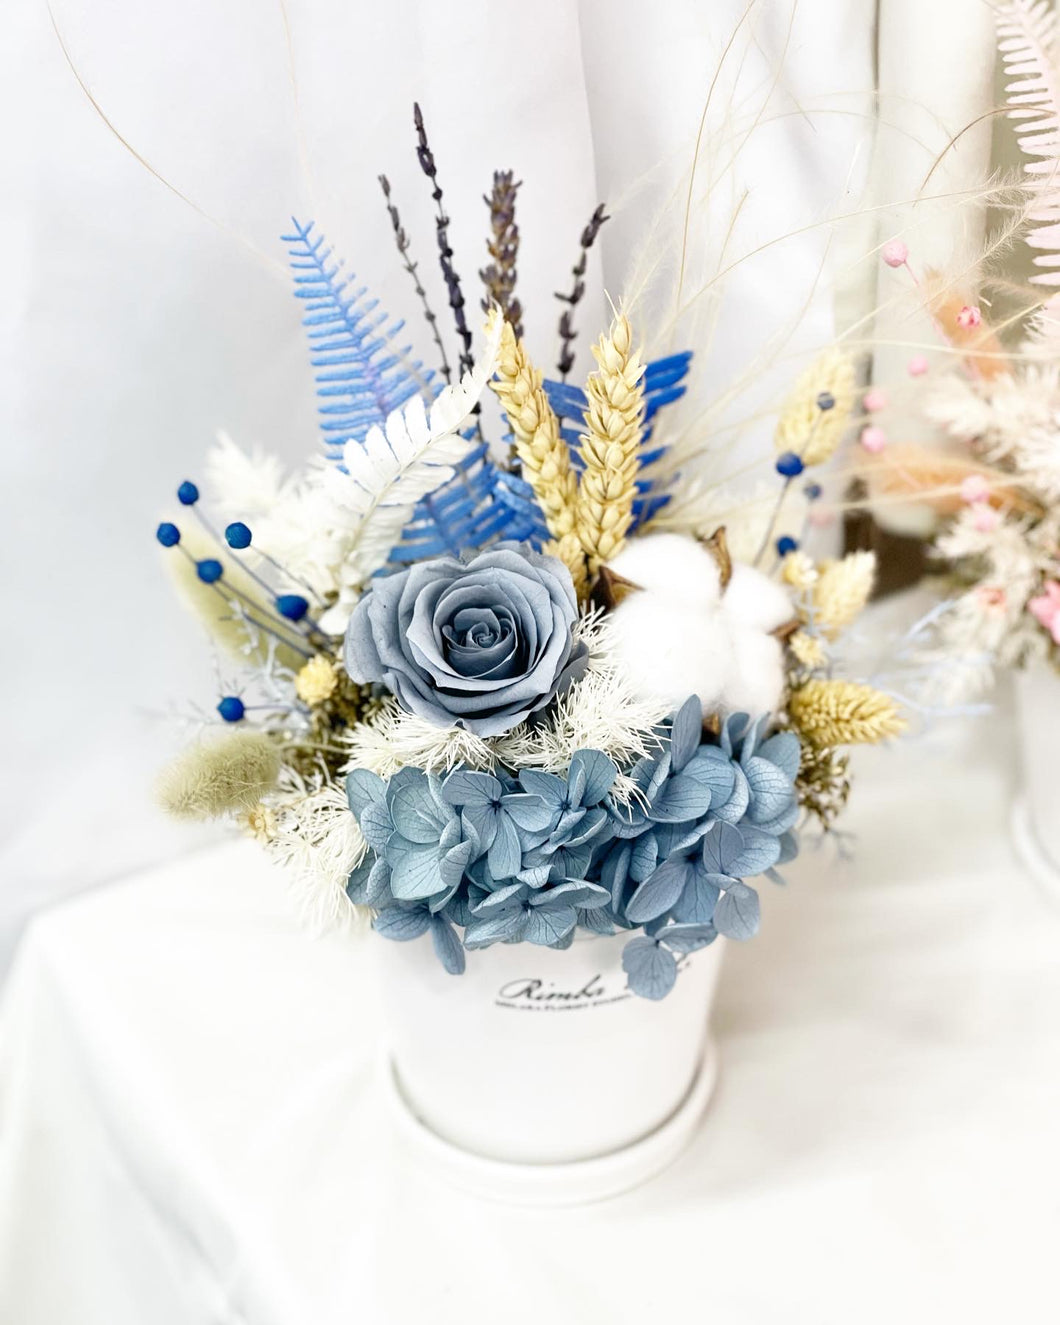 Preserved Flower Vase To You (Preserved Blue Flowers Roses, Cotton Flowers & Assorted Dried Flowers Collection)